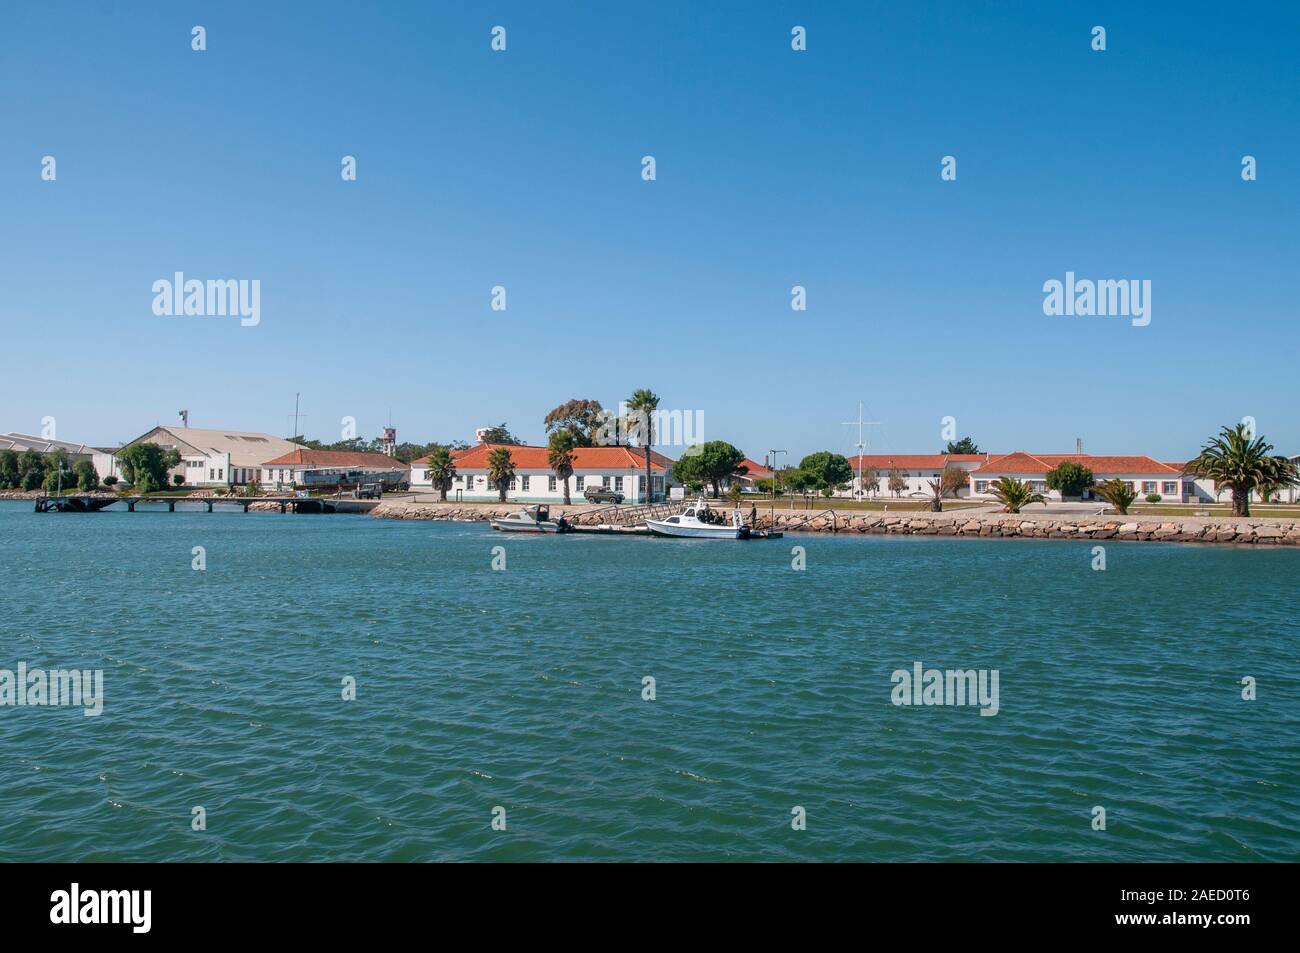 No 2 Parachute Troops Operational Base or BOPT 2, on the shore of the Aveiro lagoon at Sao Jacinto, Portugal Stock Photo